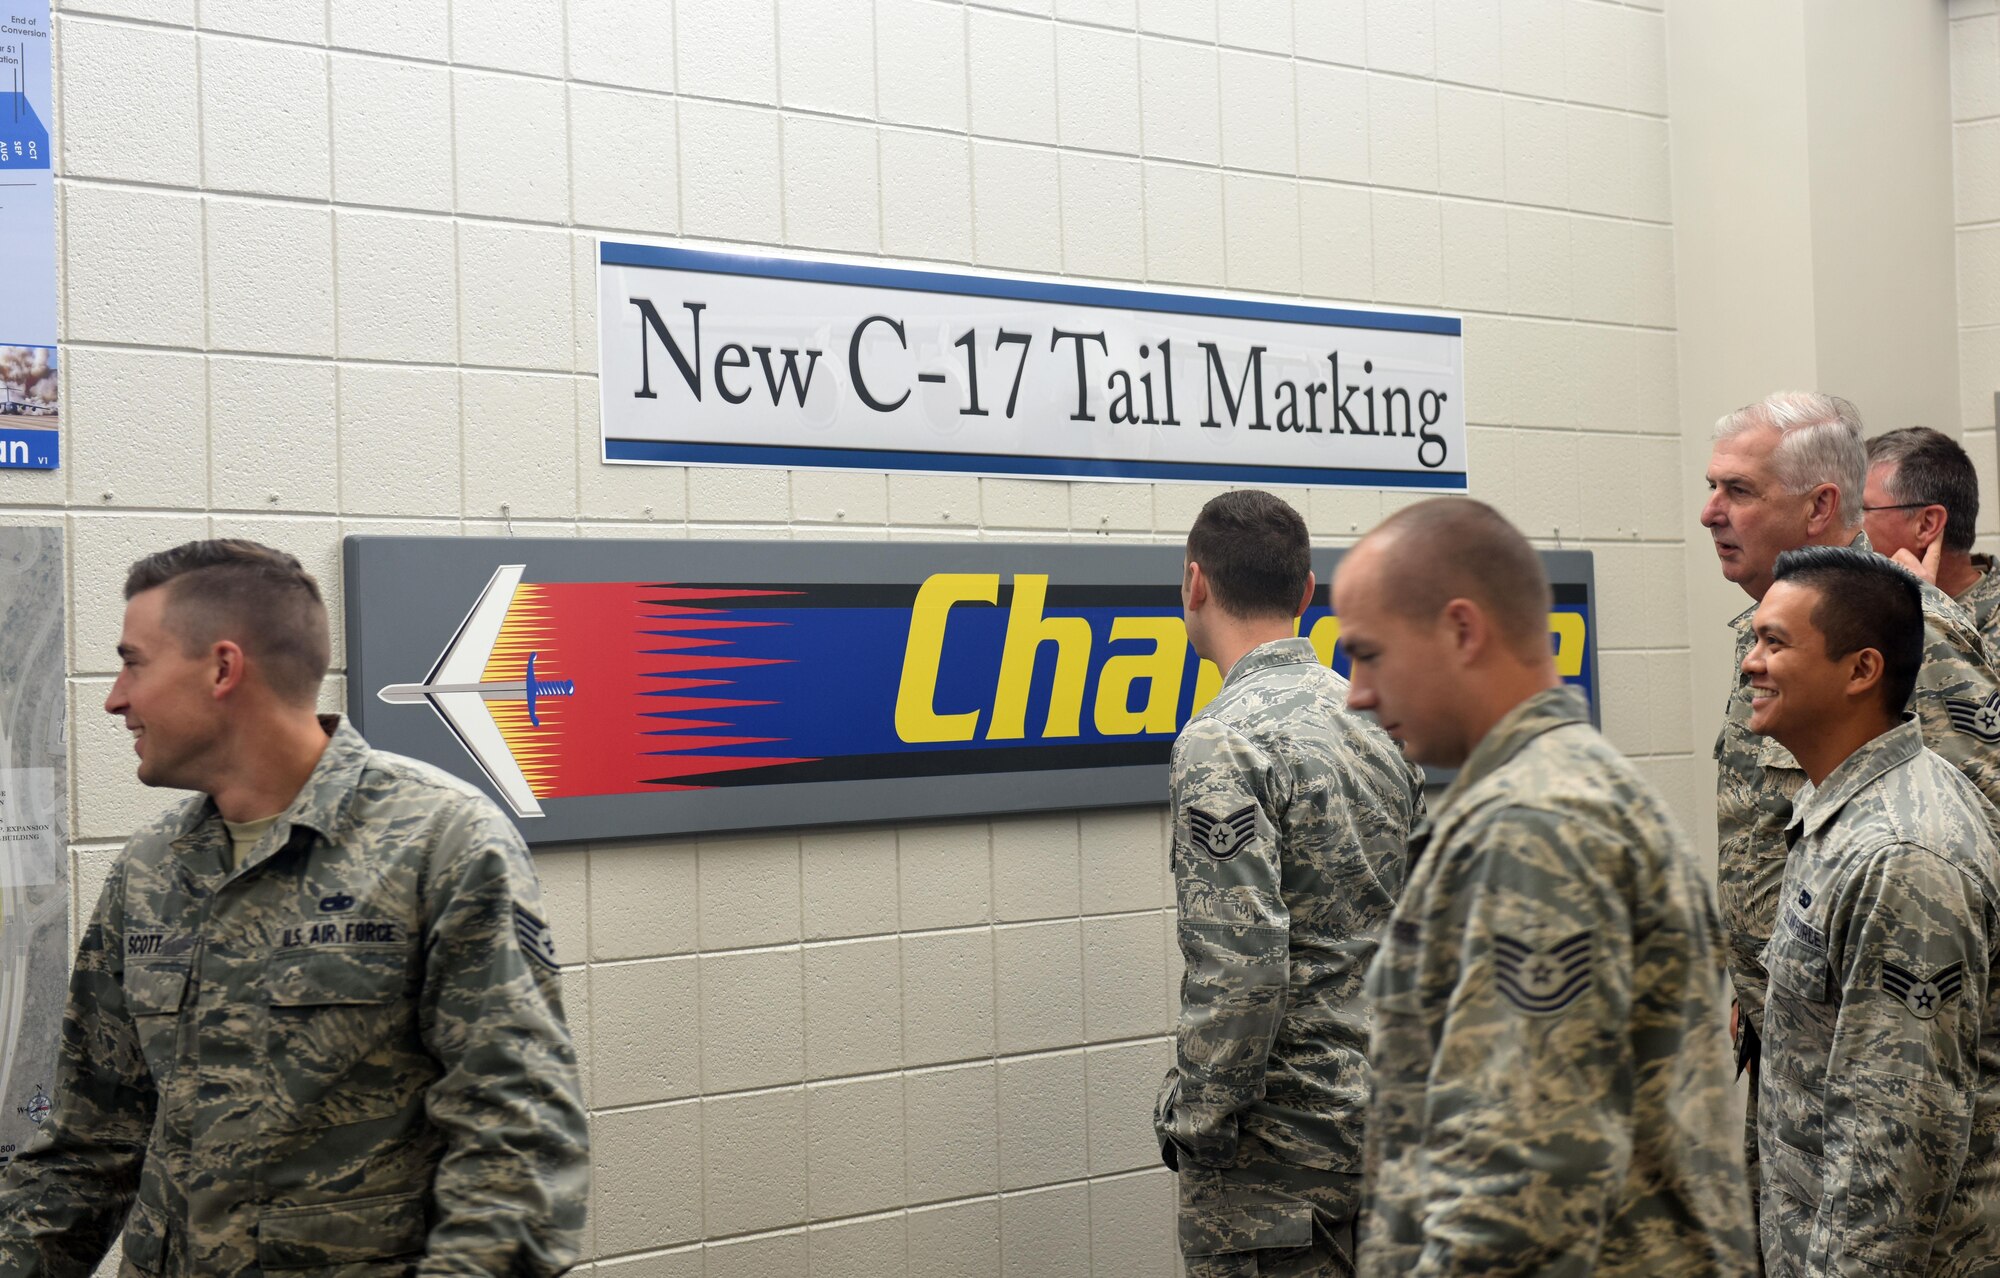 Members of the North Carolina Air National Guard (NCANG) browse the information boards and review the newly unveiled C-17 Globemaster III aircraft tail flash in the dining facility at the NCANG Base, Charlotte Douglas International Airport, May 6, 2017. The tail flash is an integral part of establishing the brand of the NCANG. Every detail from the colors, to the length of the sabre, and the bold print symbolize the importance of new mission that will be carried out by the airmen and C-17 Globemaster III aircraft. (U.S. Air National Guard photo by Staff. Sgt. Laura J. Montgomery)